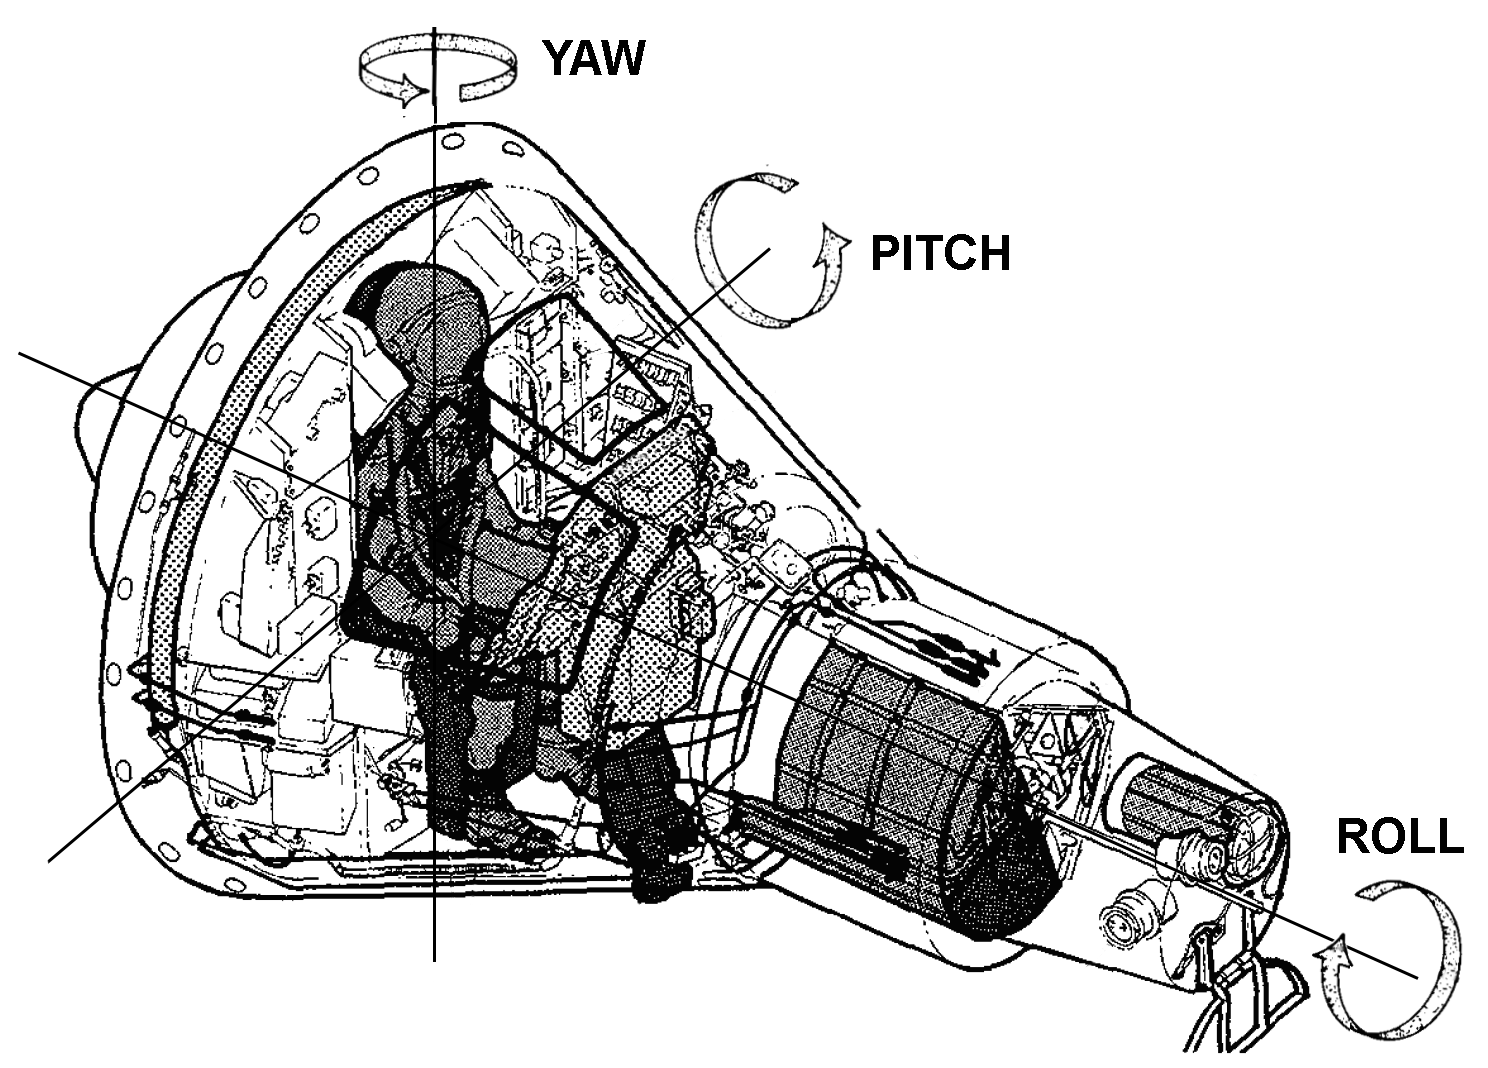 The three axes of rotation for the spacecraft: yaw, pitch and roll 